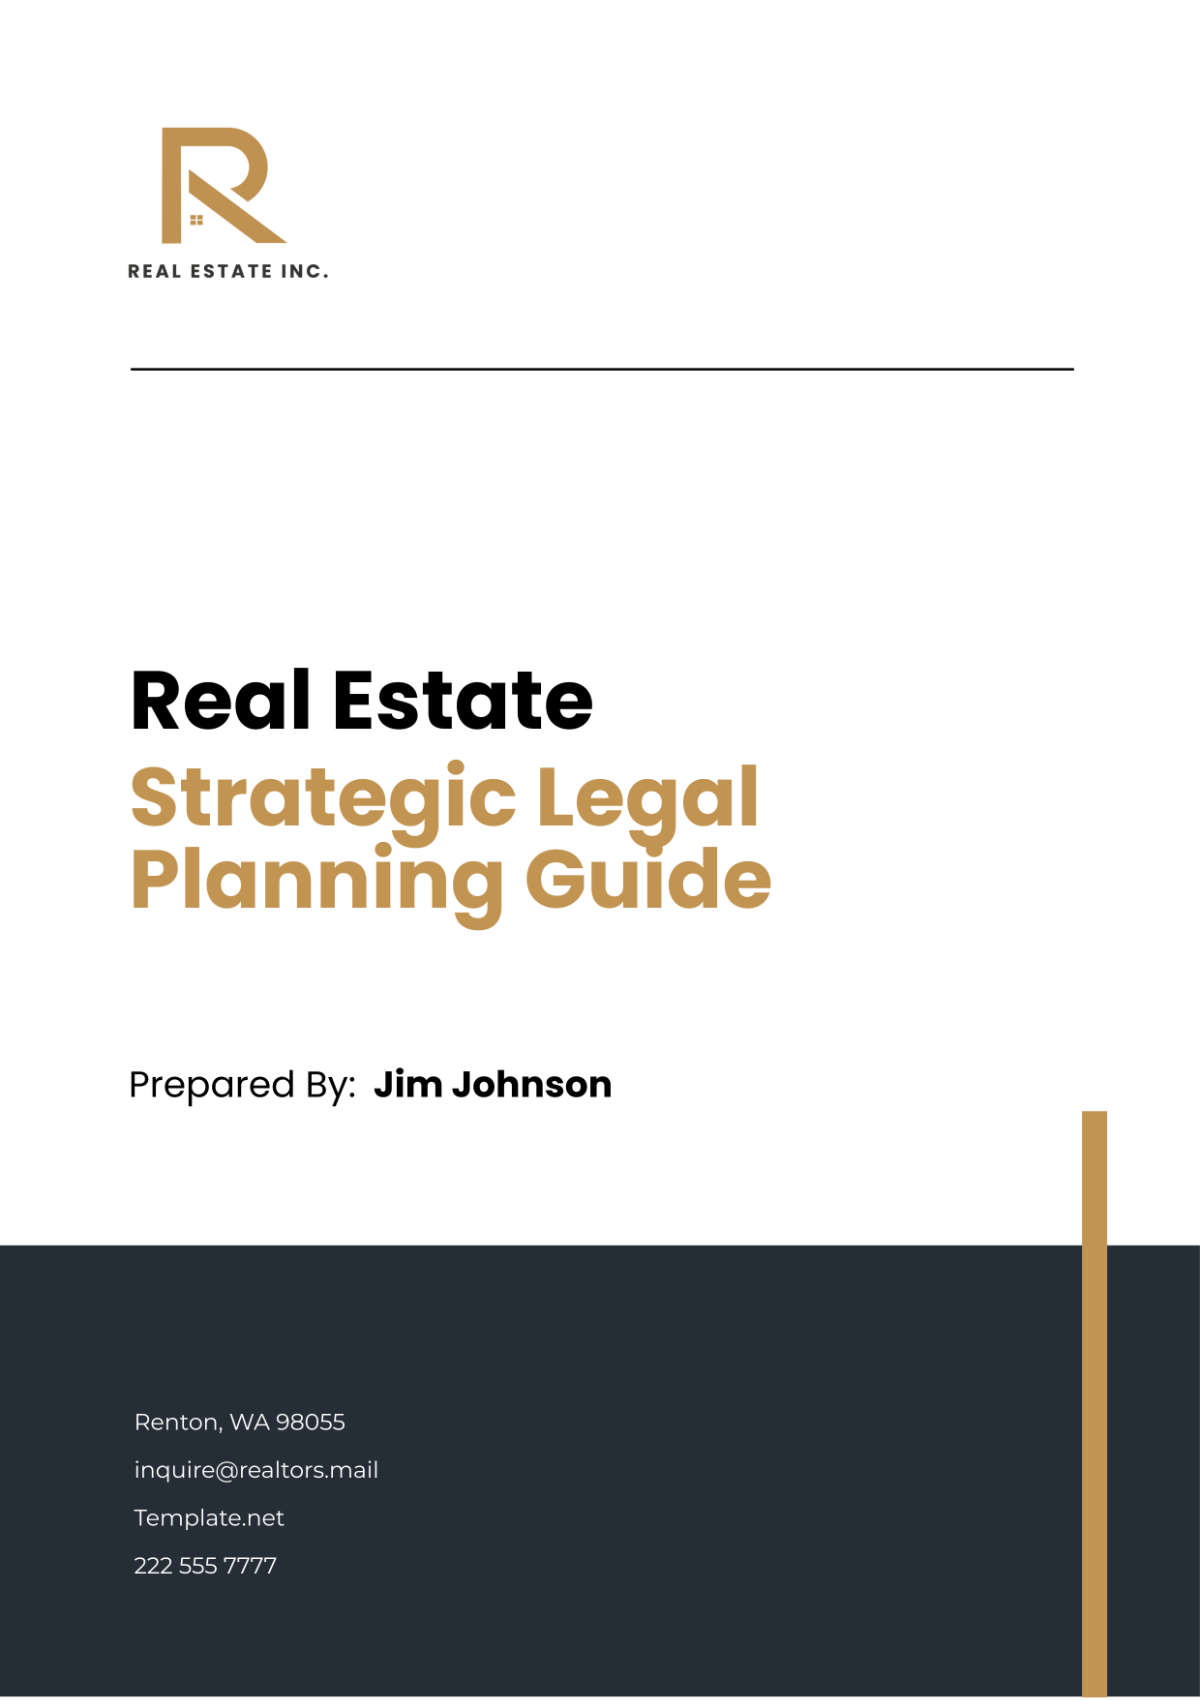 Real Estate Strategic Legal Planning Guide Template